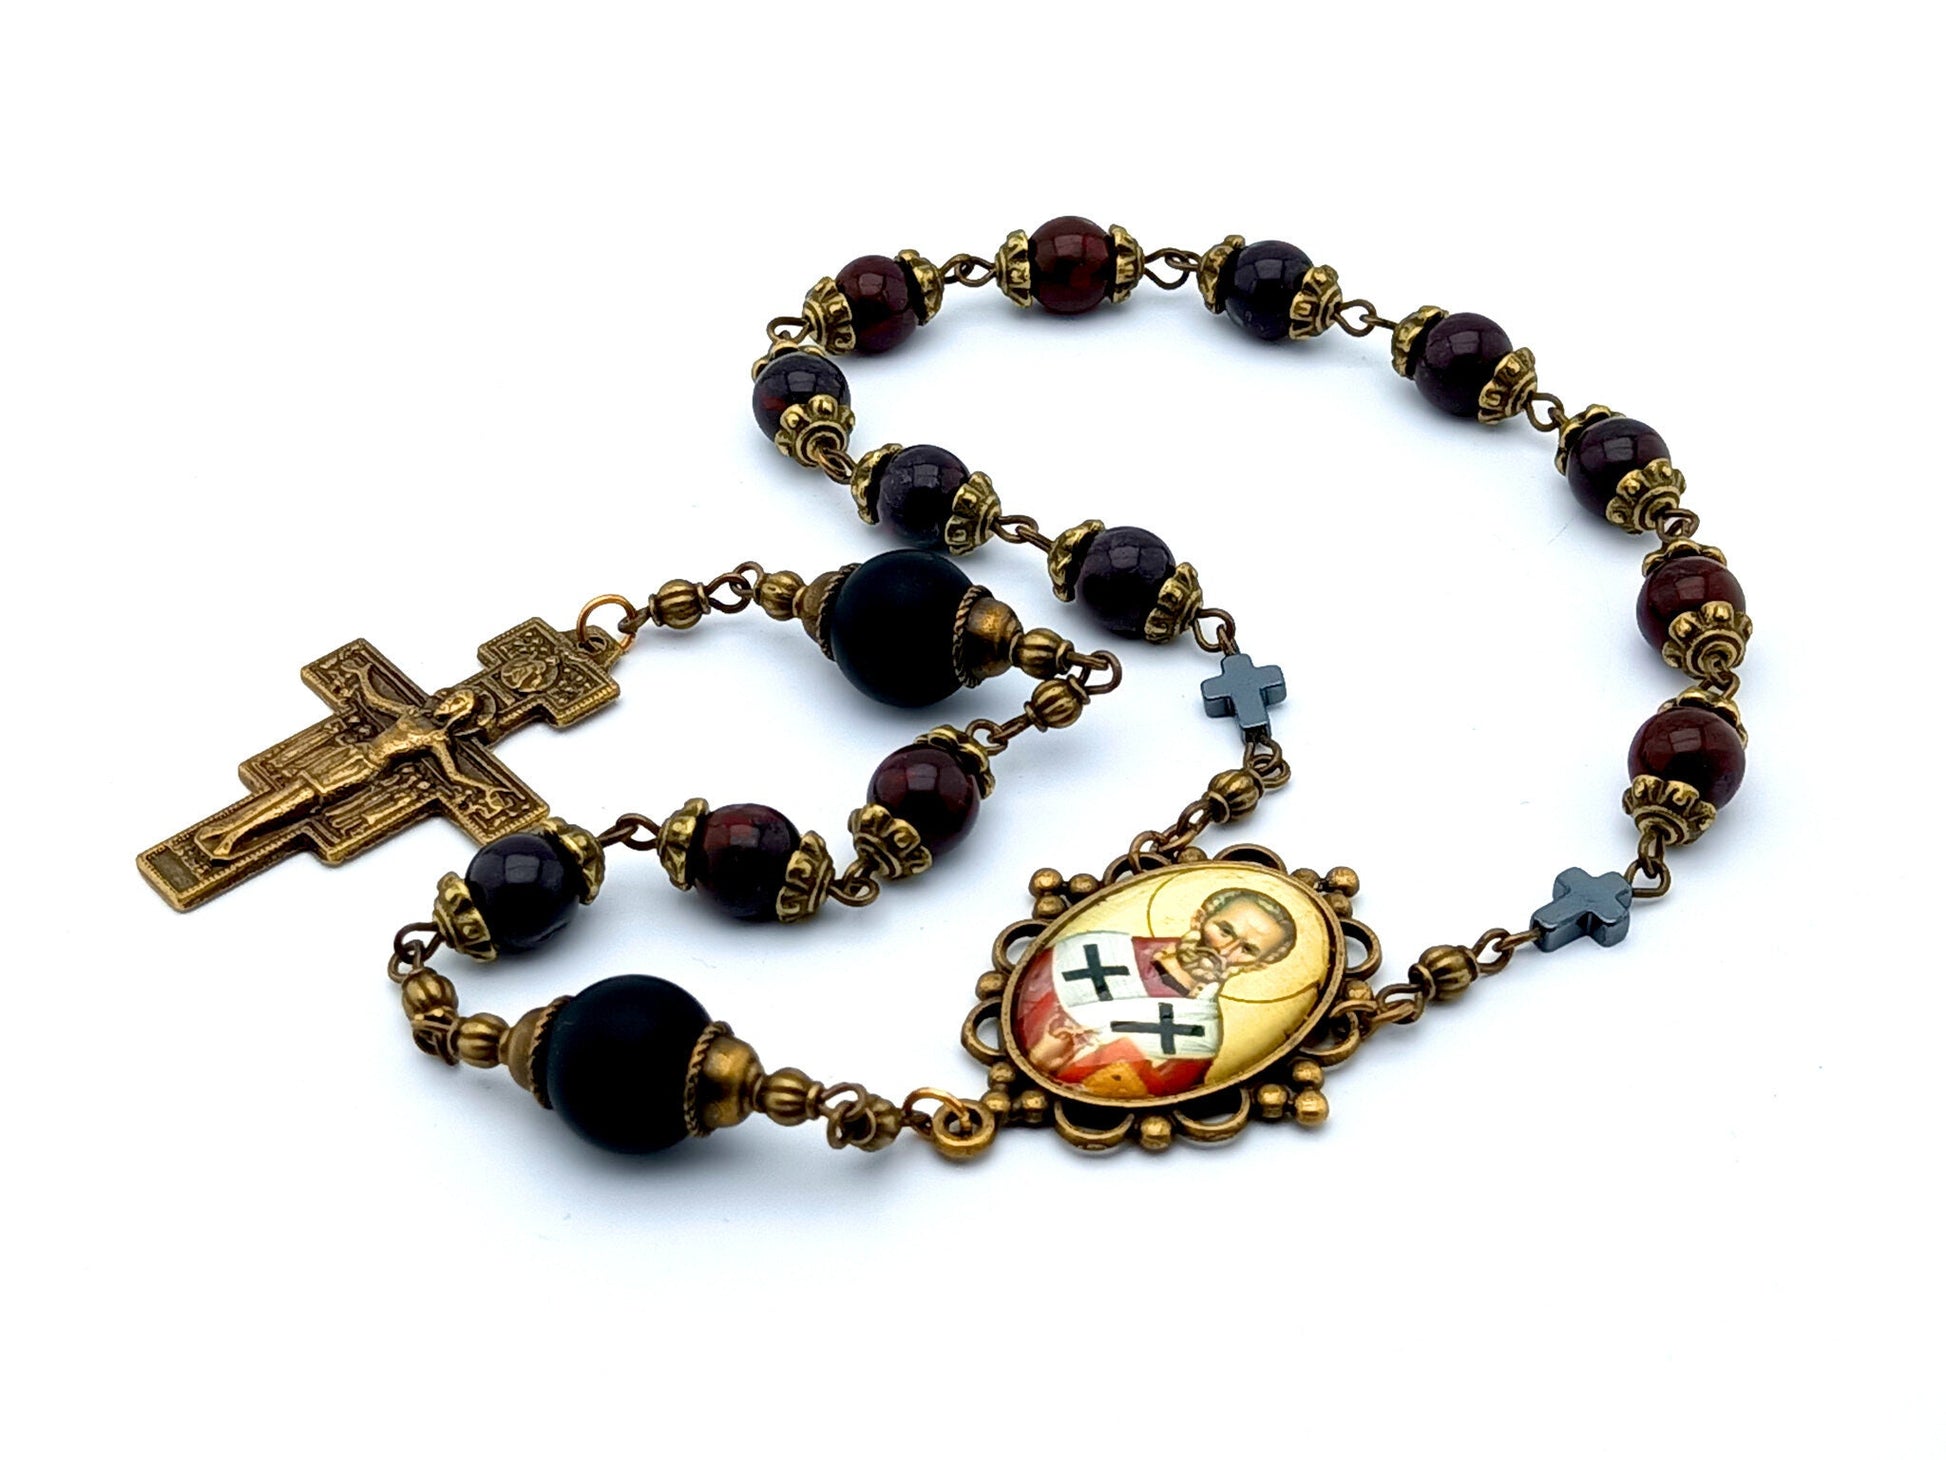 Saint John Chrysostom unique rosary beads with deep red gemstone and onyx beads, bronze crucifix and picture centre medal.